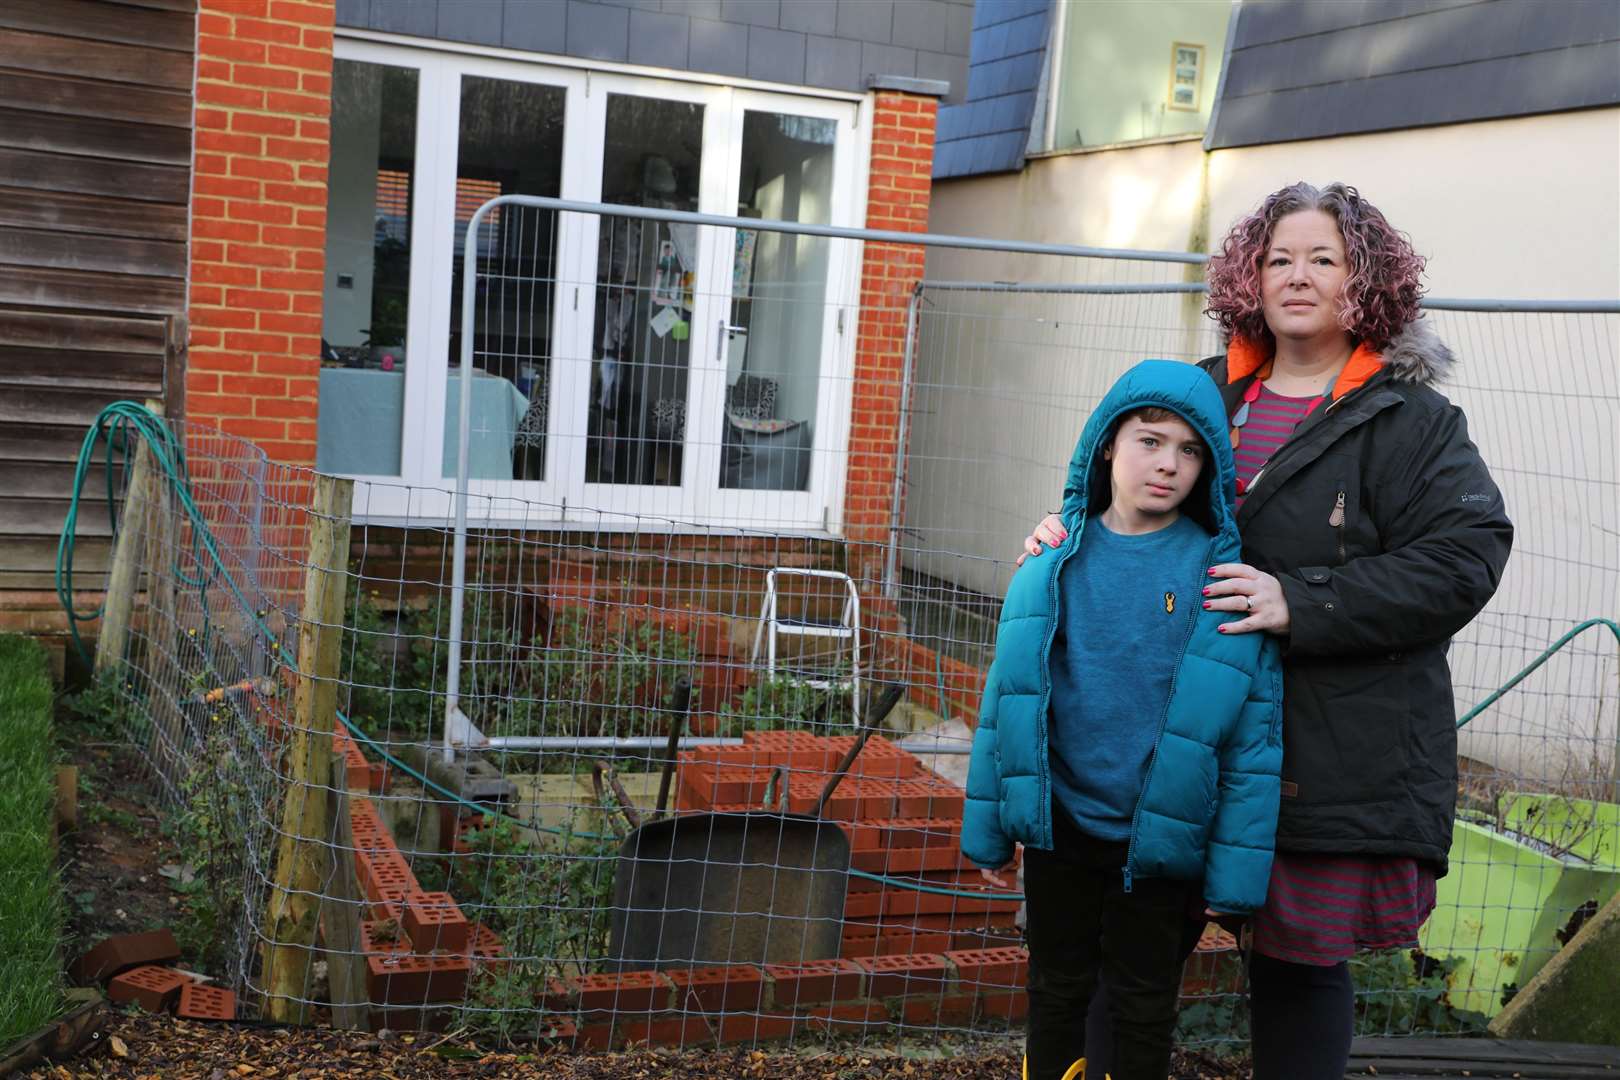 Shelley Weeks and son Olly Weeks, 8, next to incomplete building work Picture: Andy Jones